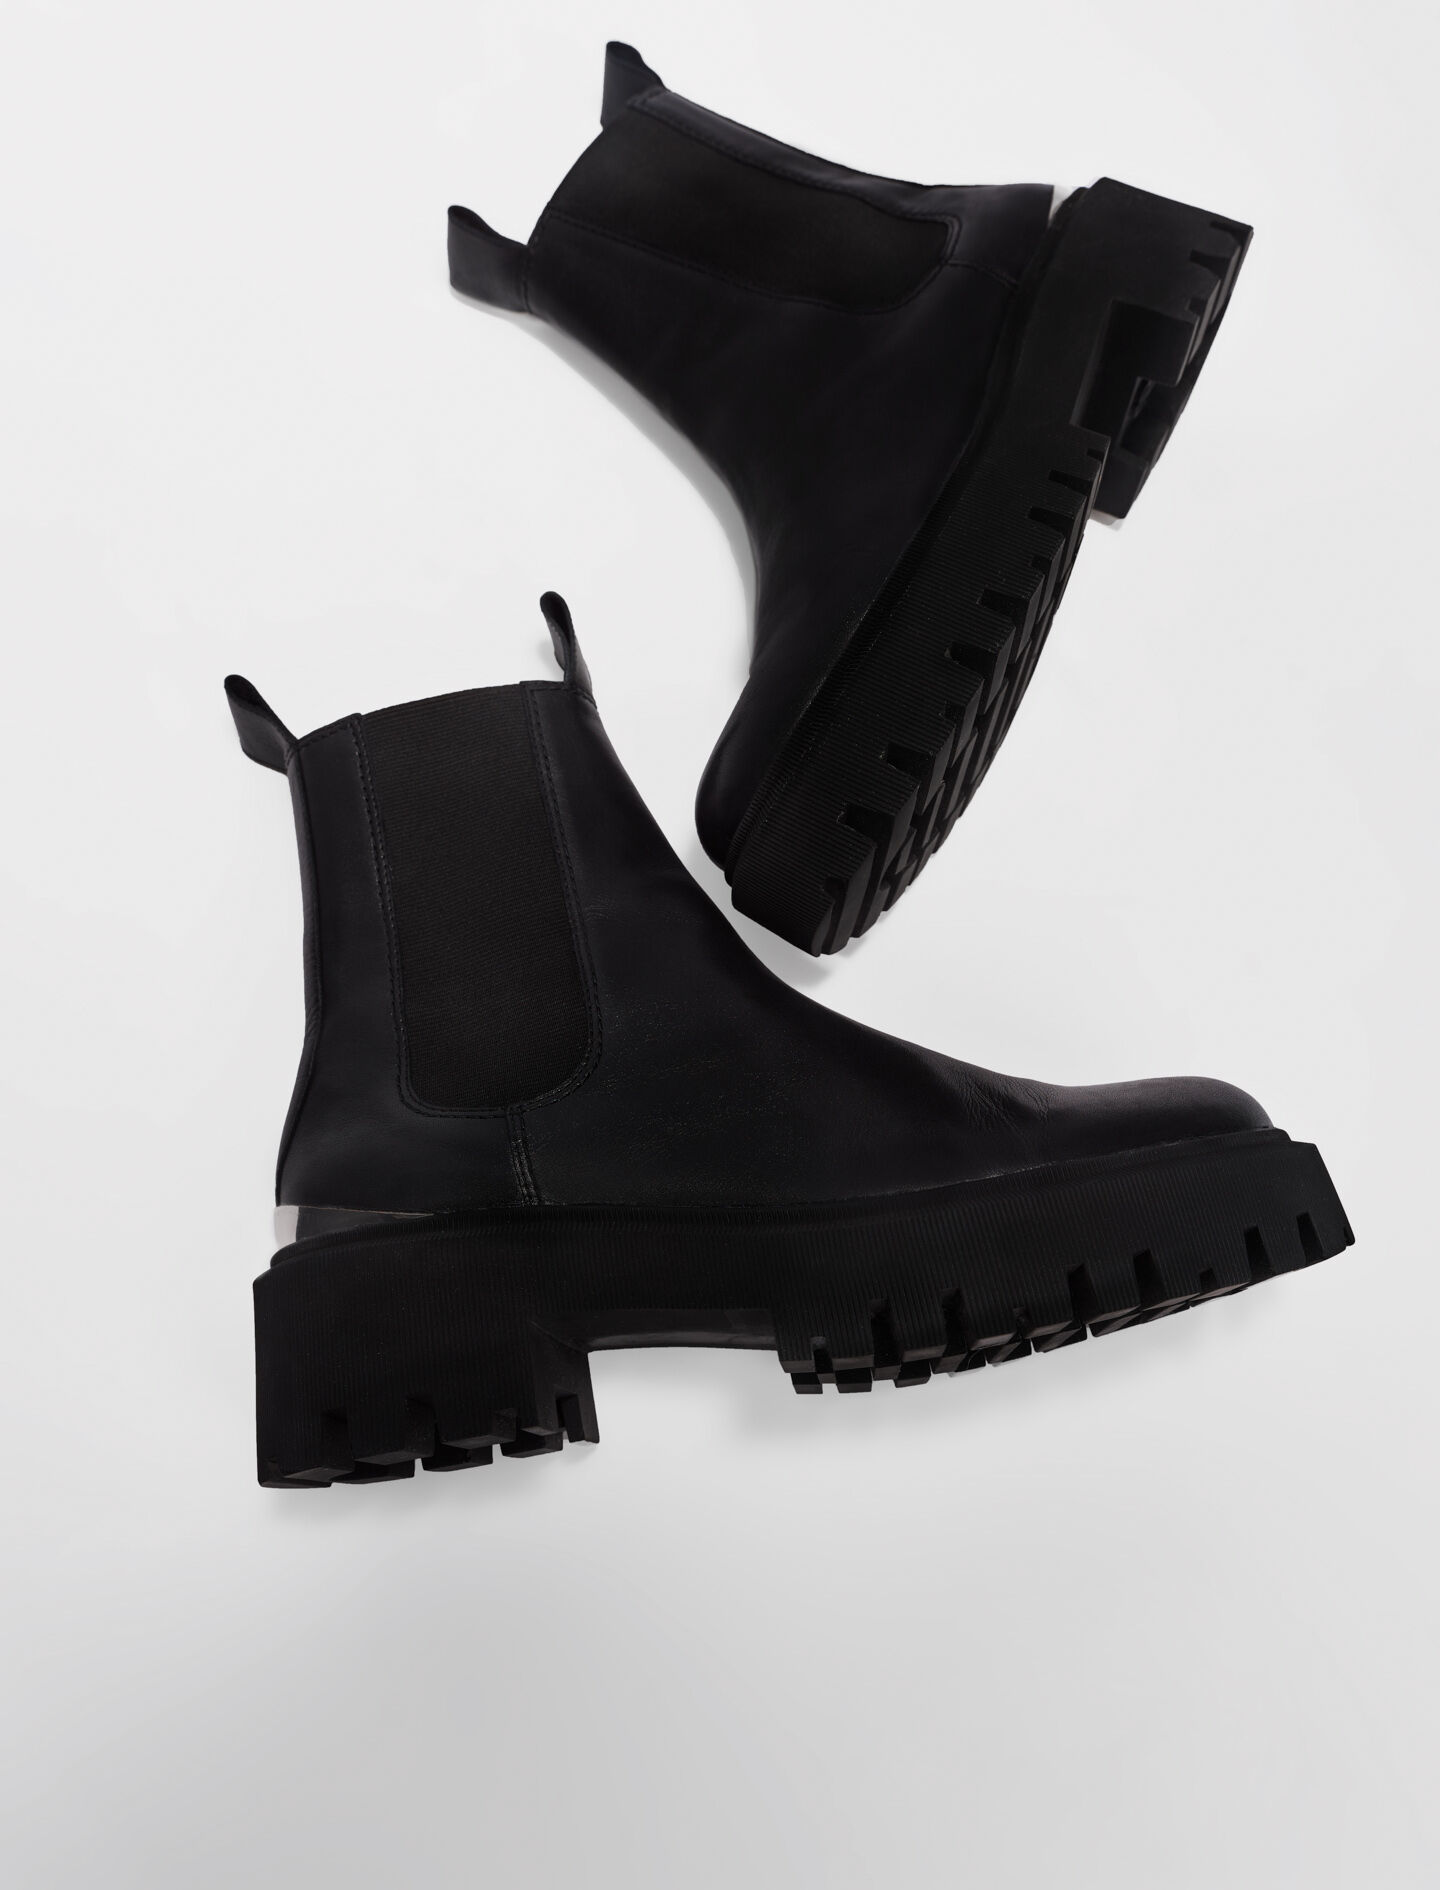 Femme Chaussures Maje Femme Bottines & low boots Maje Femme Bottines & low boots motards Maje Femme Bottines & low boots motards Maje Femme Bottines & low boots motards MAJE 38 noir 